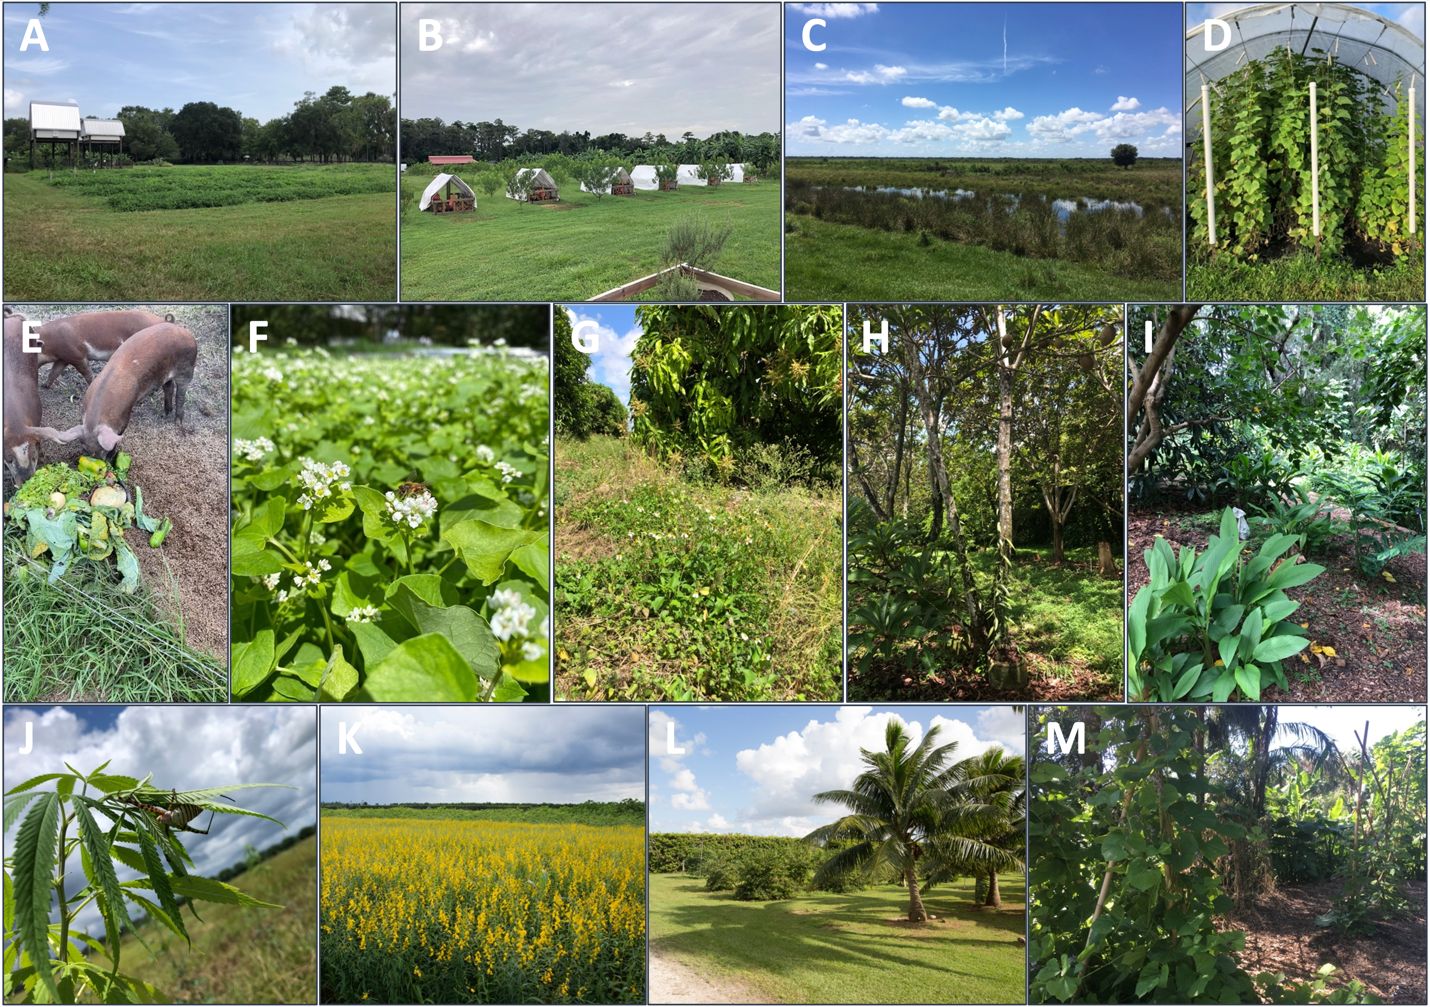 Examples of agroecology in Florida. A) Row crop under bat houses. Field and Fork Farm and Gardens, UF, Gainesville, FL. B) Mobile chicken tractors around fruit trees. Everoak Farm, Orlando, FL. C) Riparian buffer and semi-native pasture. Buck Island Ranch, Lake Placid, FL. D) High tunnel and trellis. Everoak Farm, Orlando, FL. E) Pigs and garden scraps. Everoak Farm, Orlando, FL. F) Bees and cover crop. Everoak Farm, Orlando, FL. G) Mango flowering with wildflowers. UF/IFAS TREC, Homestead, FL. H) Fruit tree and vining orchid. LNB Groves, Homestead, FL. I) Semi-tropical agroforest. Field and Fork Farm and Gardens, UF, Gainesville, FL. J) Hemp and spider. UF/IFAS TREC, Homestead, FL. K) Summer cover crop. UF/IFAS TREC, Homestead, FL. L) Mixed fruit orchard. UF/IFAS TREC, Homestead, FL. M) Tropical agroforest. ECHO Global Farm, North Fort Myers, FL. 